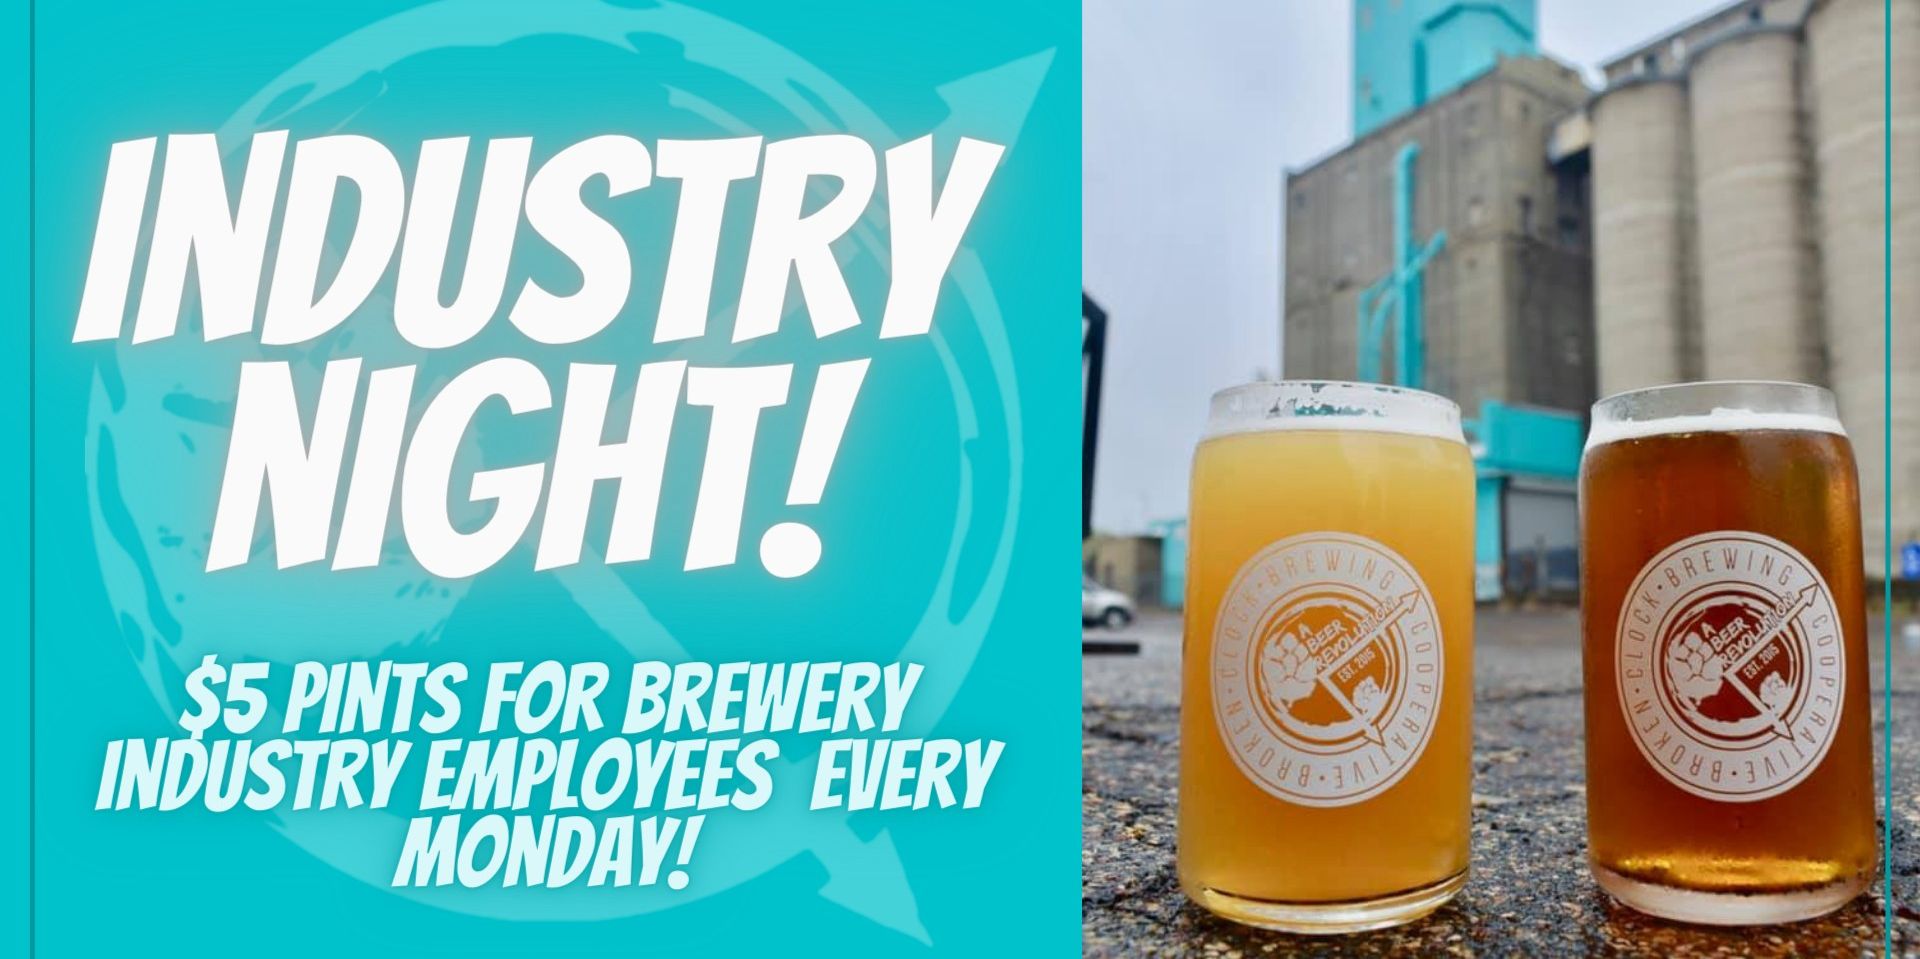 Industry Night: $5 Pints for Brewery Industry Professionals promotional image